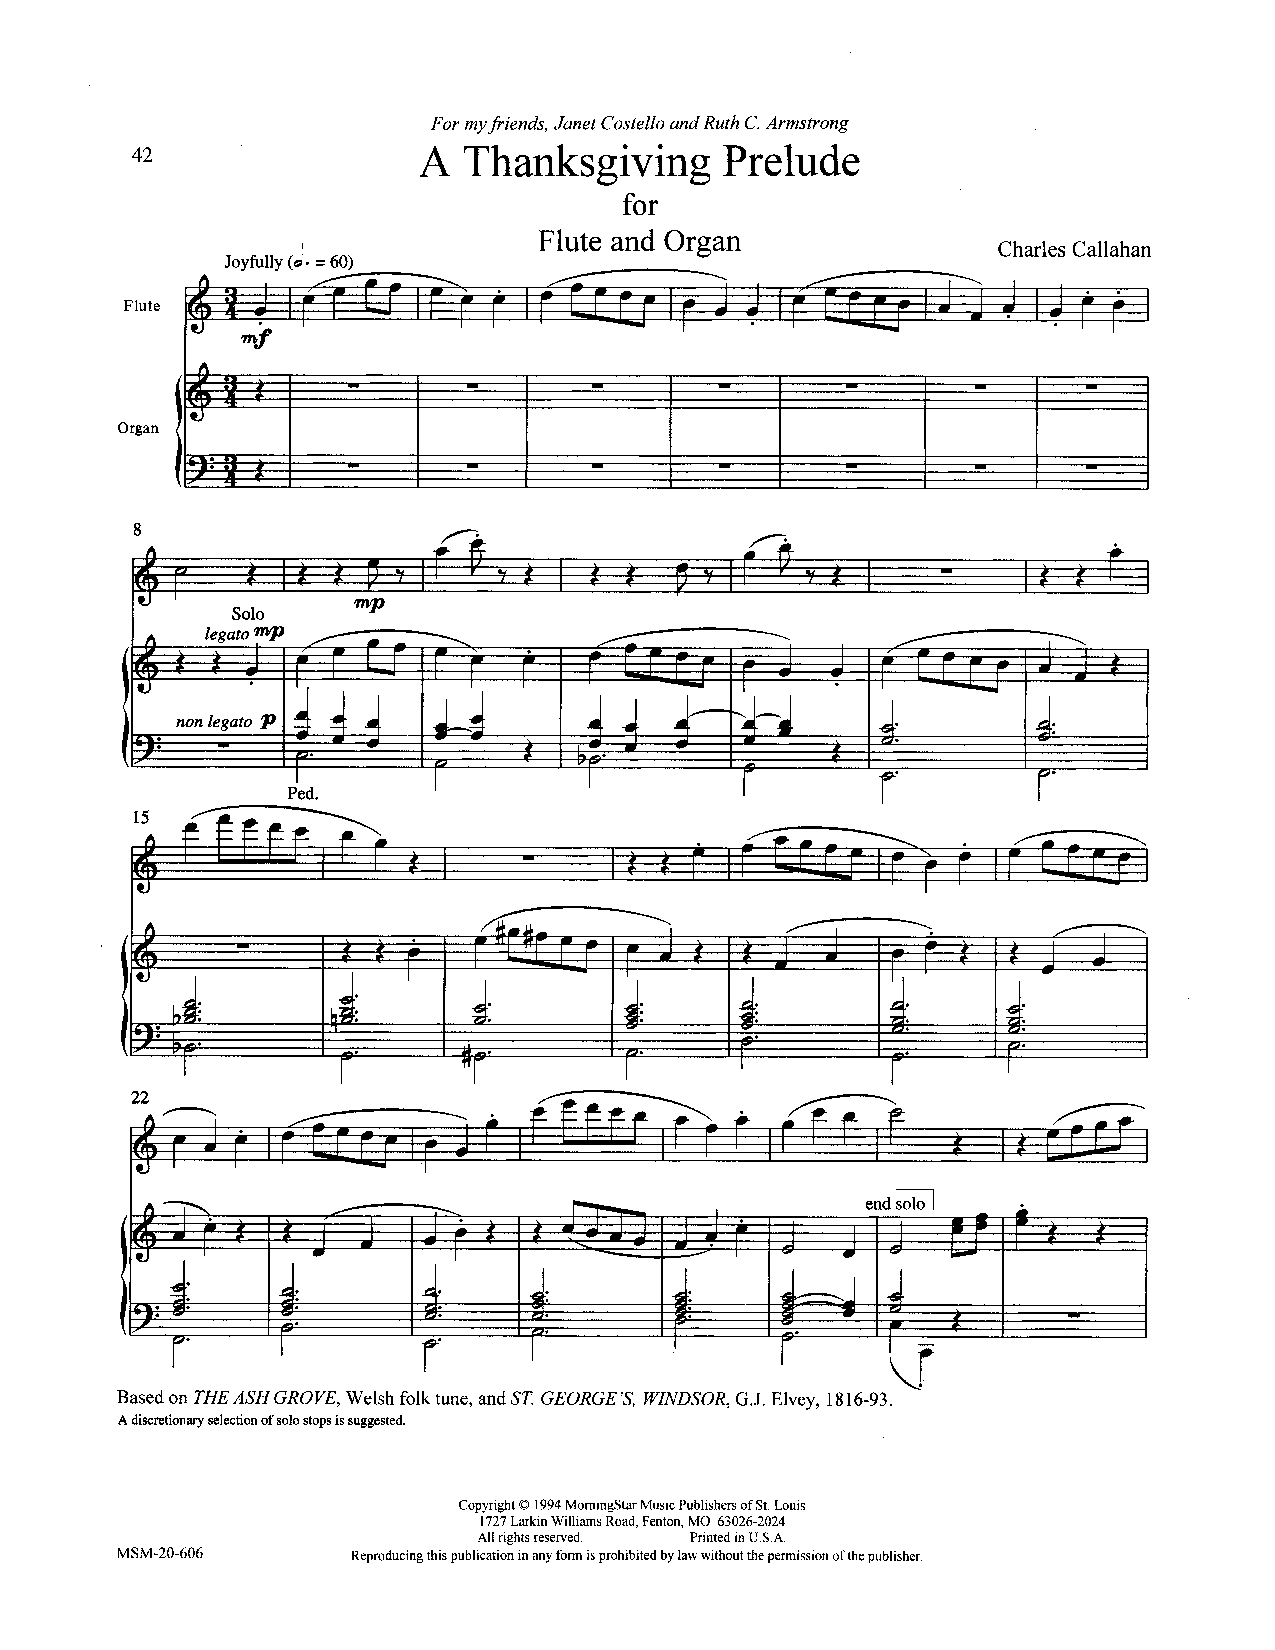 Preludes for Flute and Organ